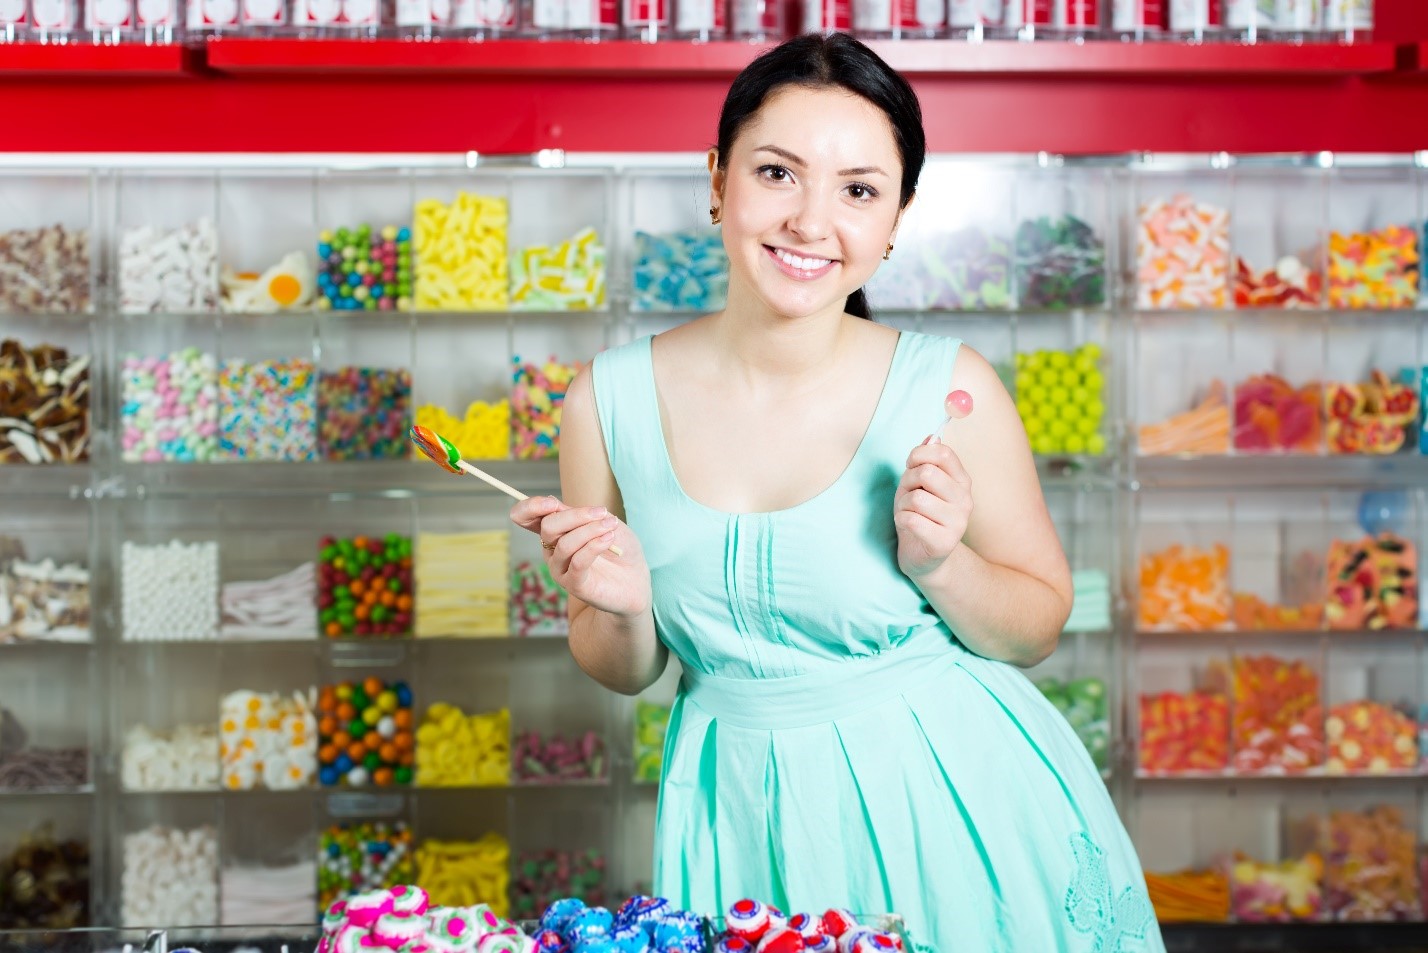 Young woman posing with a lollipop in front of a display in a candy shop